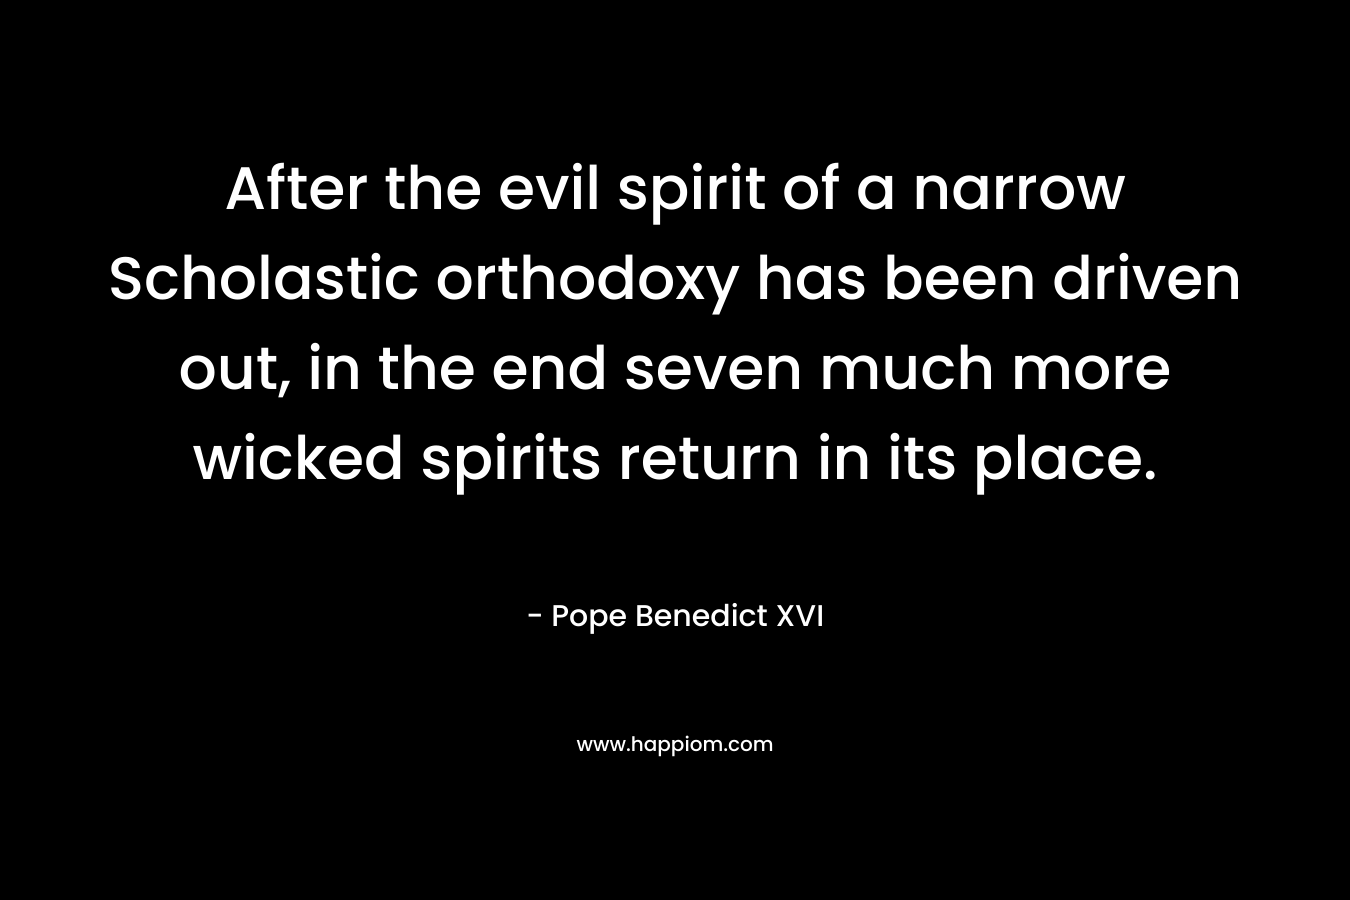 After the evil spirit of a narrow Scholastic orthodoxy has been driven out, in the end seven much more wicked spirits return in its place. – Pope Benedict XVI